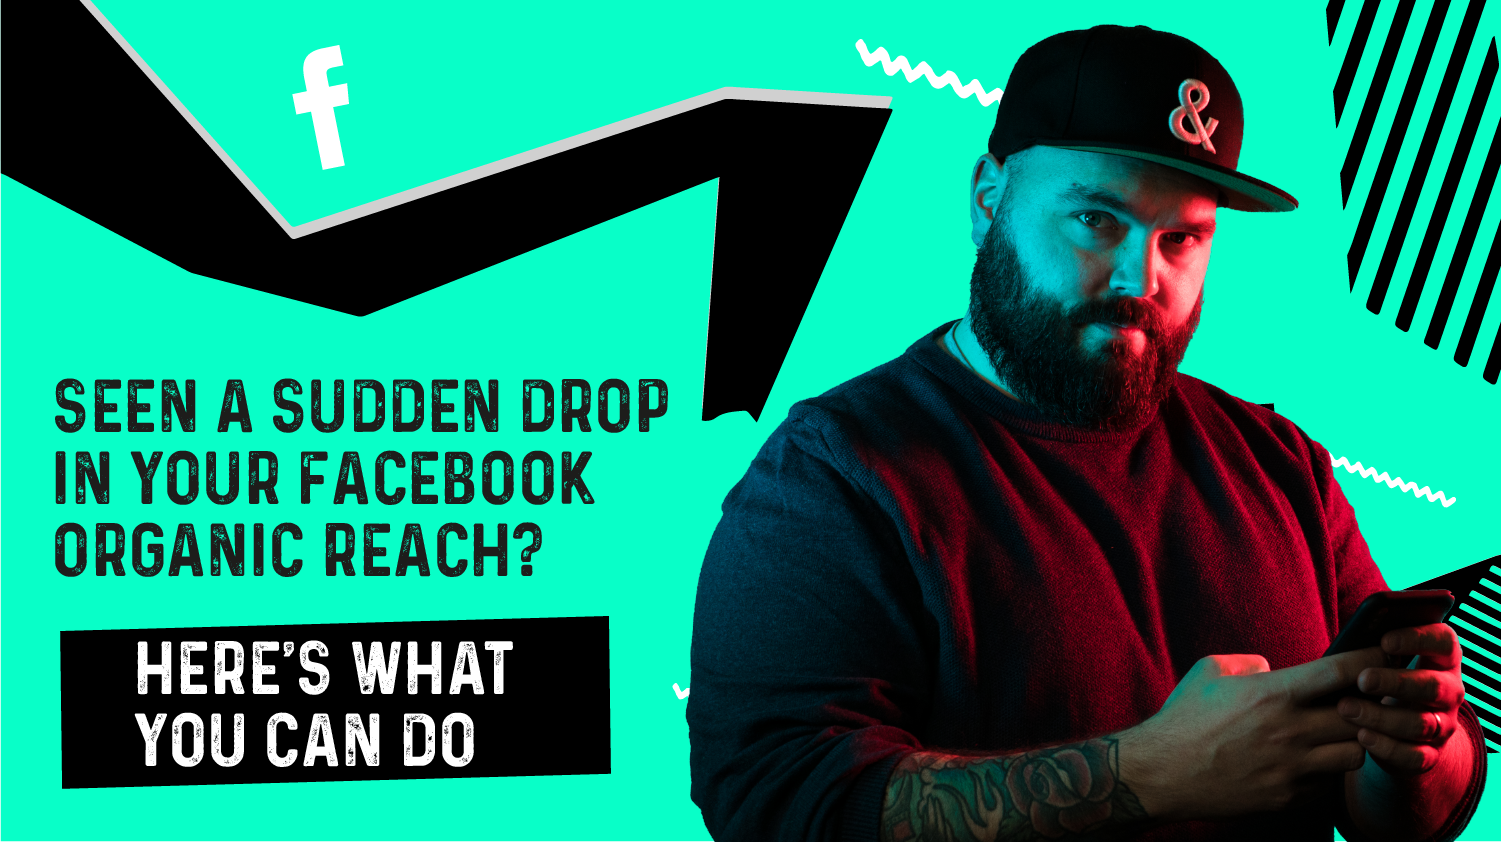 Ddf Network School - Seen a Sudden Drop in Your Facebook Organic Reach? Here's What to Do